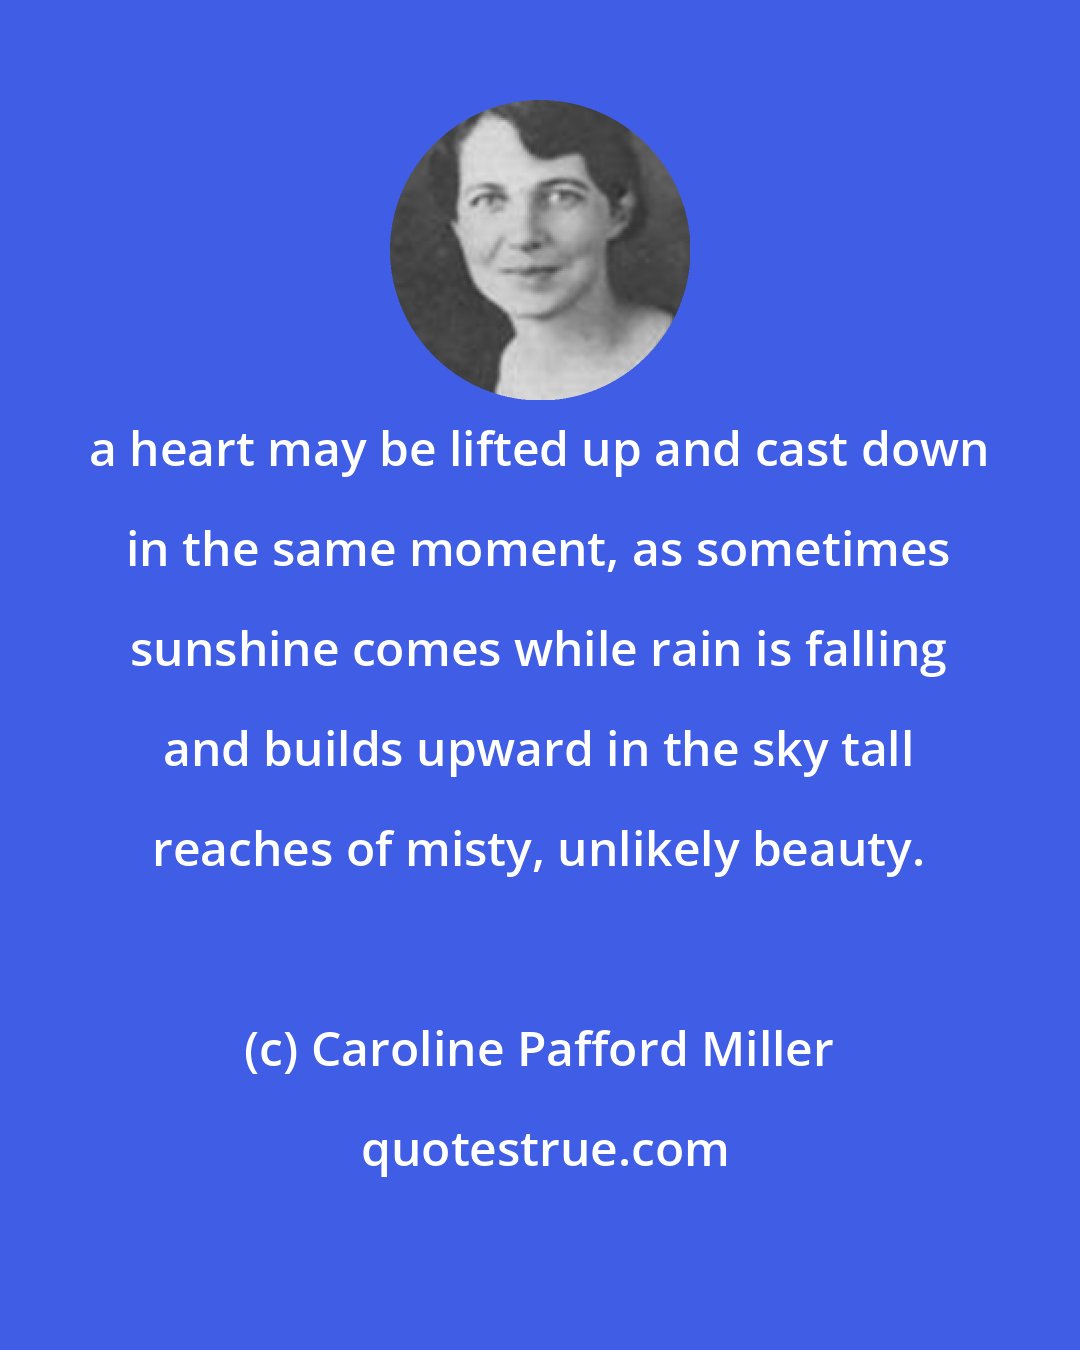 Caroline Pafford Miller: a heart may be lifted up and cast down in the same moment, as sometimes sunshine comes while rain is falling and builds upward in the sky tall reaches of misty, unlikely beauty.